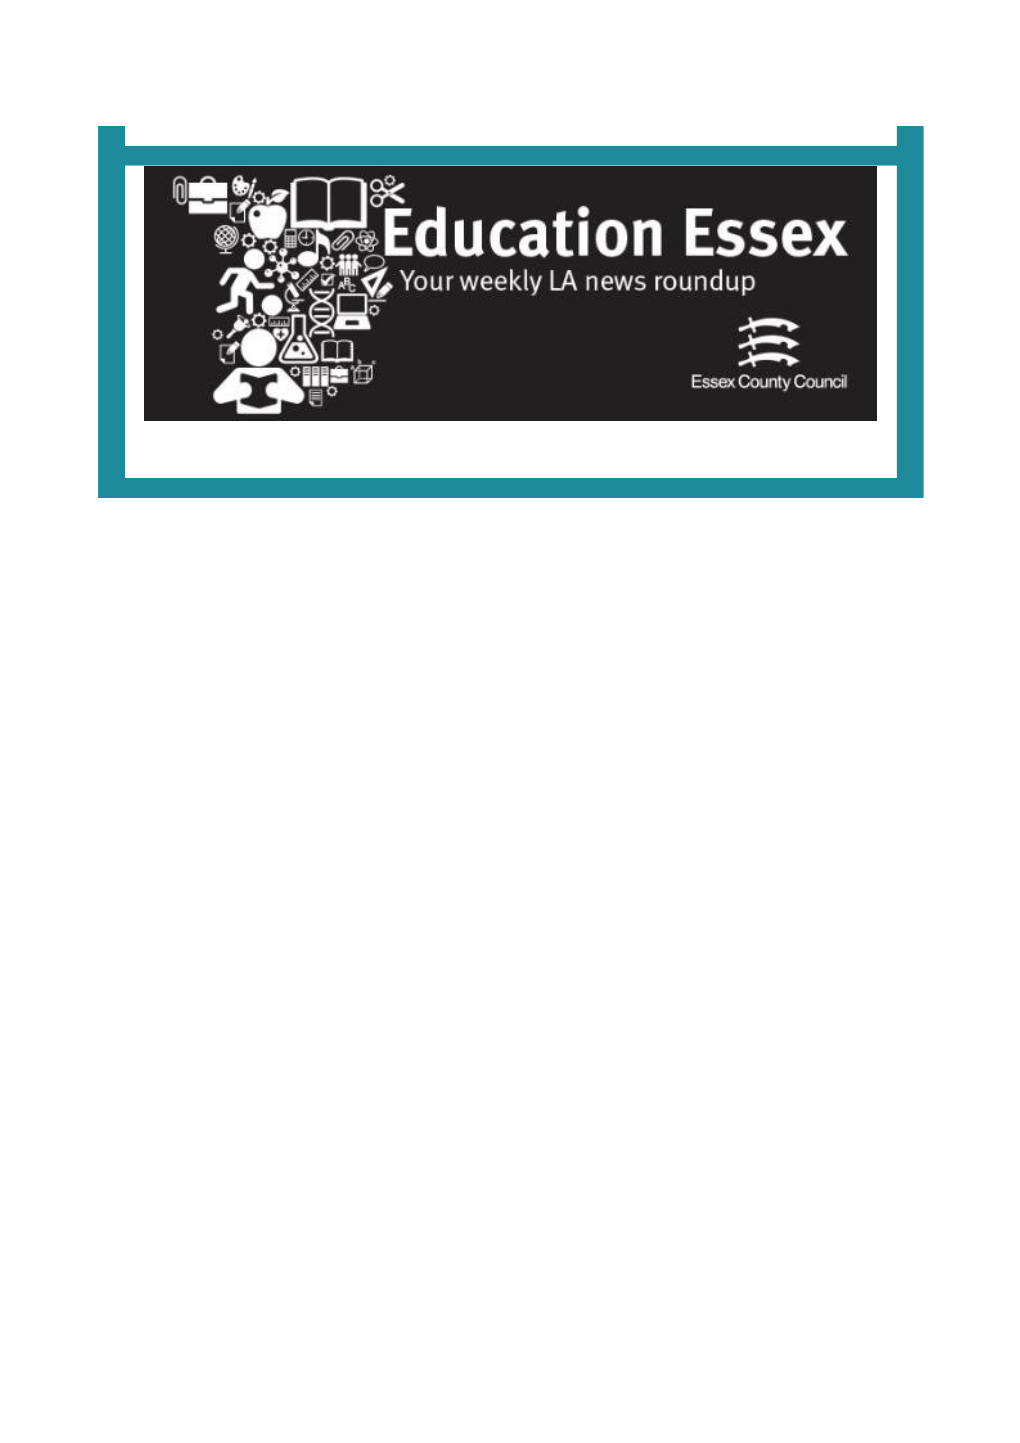 Education Essex Issue 23, 4 March 2014